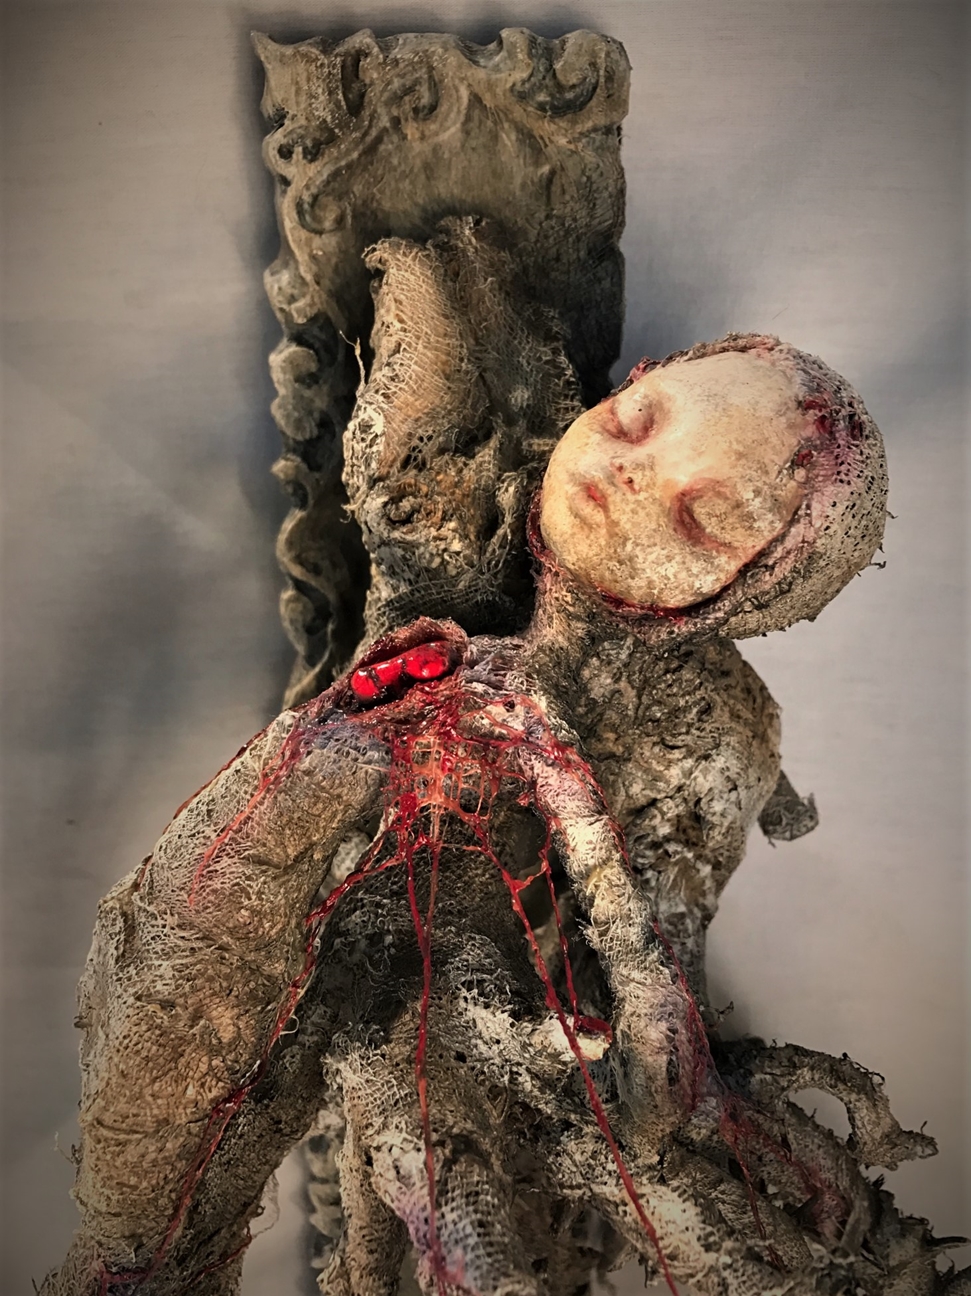 close up of wounded woman bleeding heart mixed media assemblage sculpture made of porcelain, cloth mache & wood